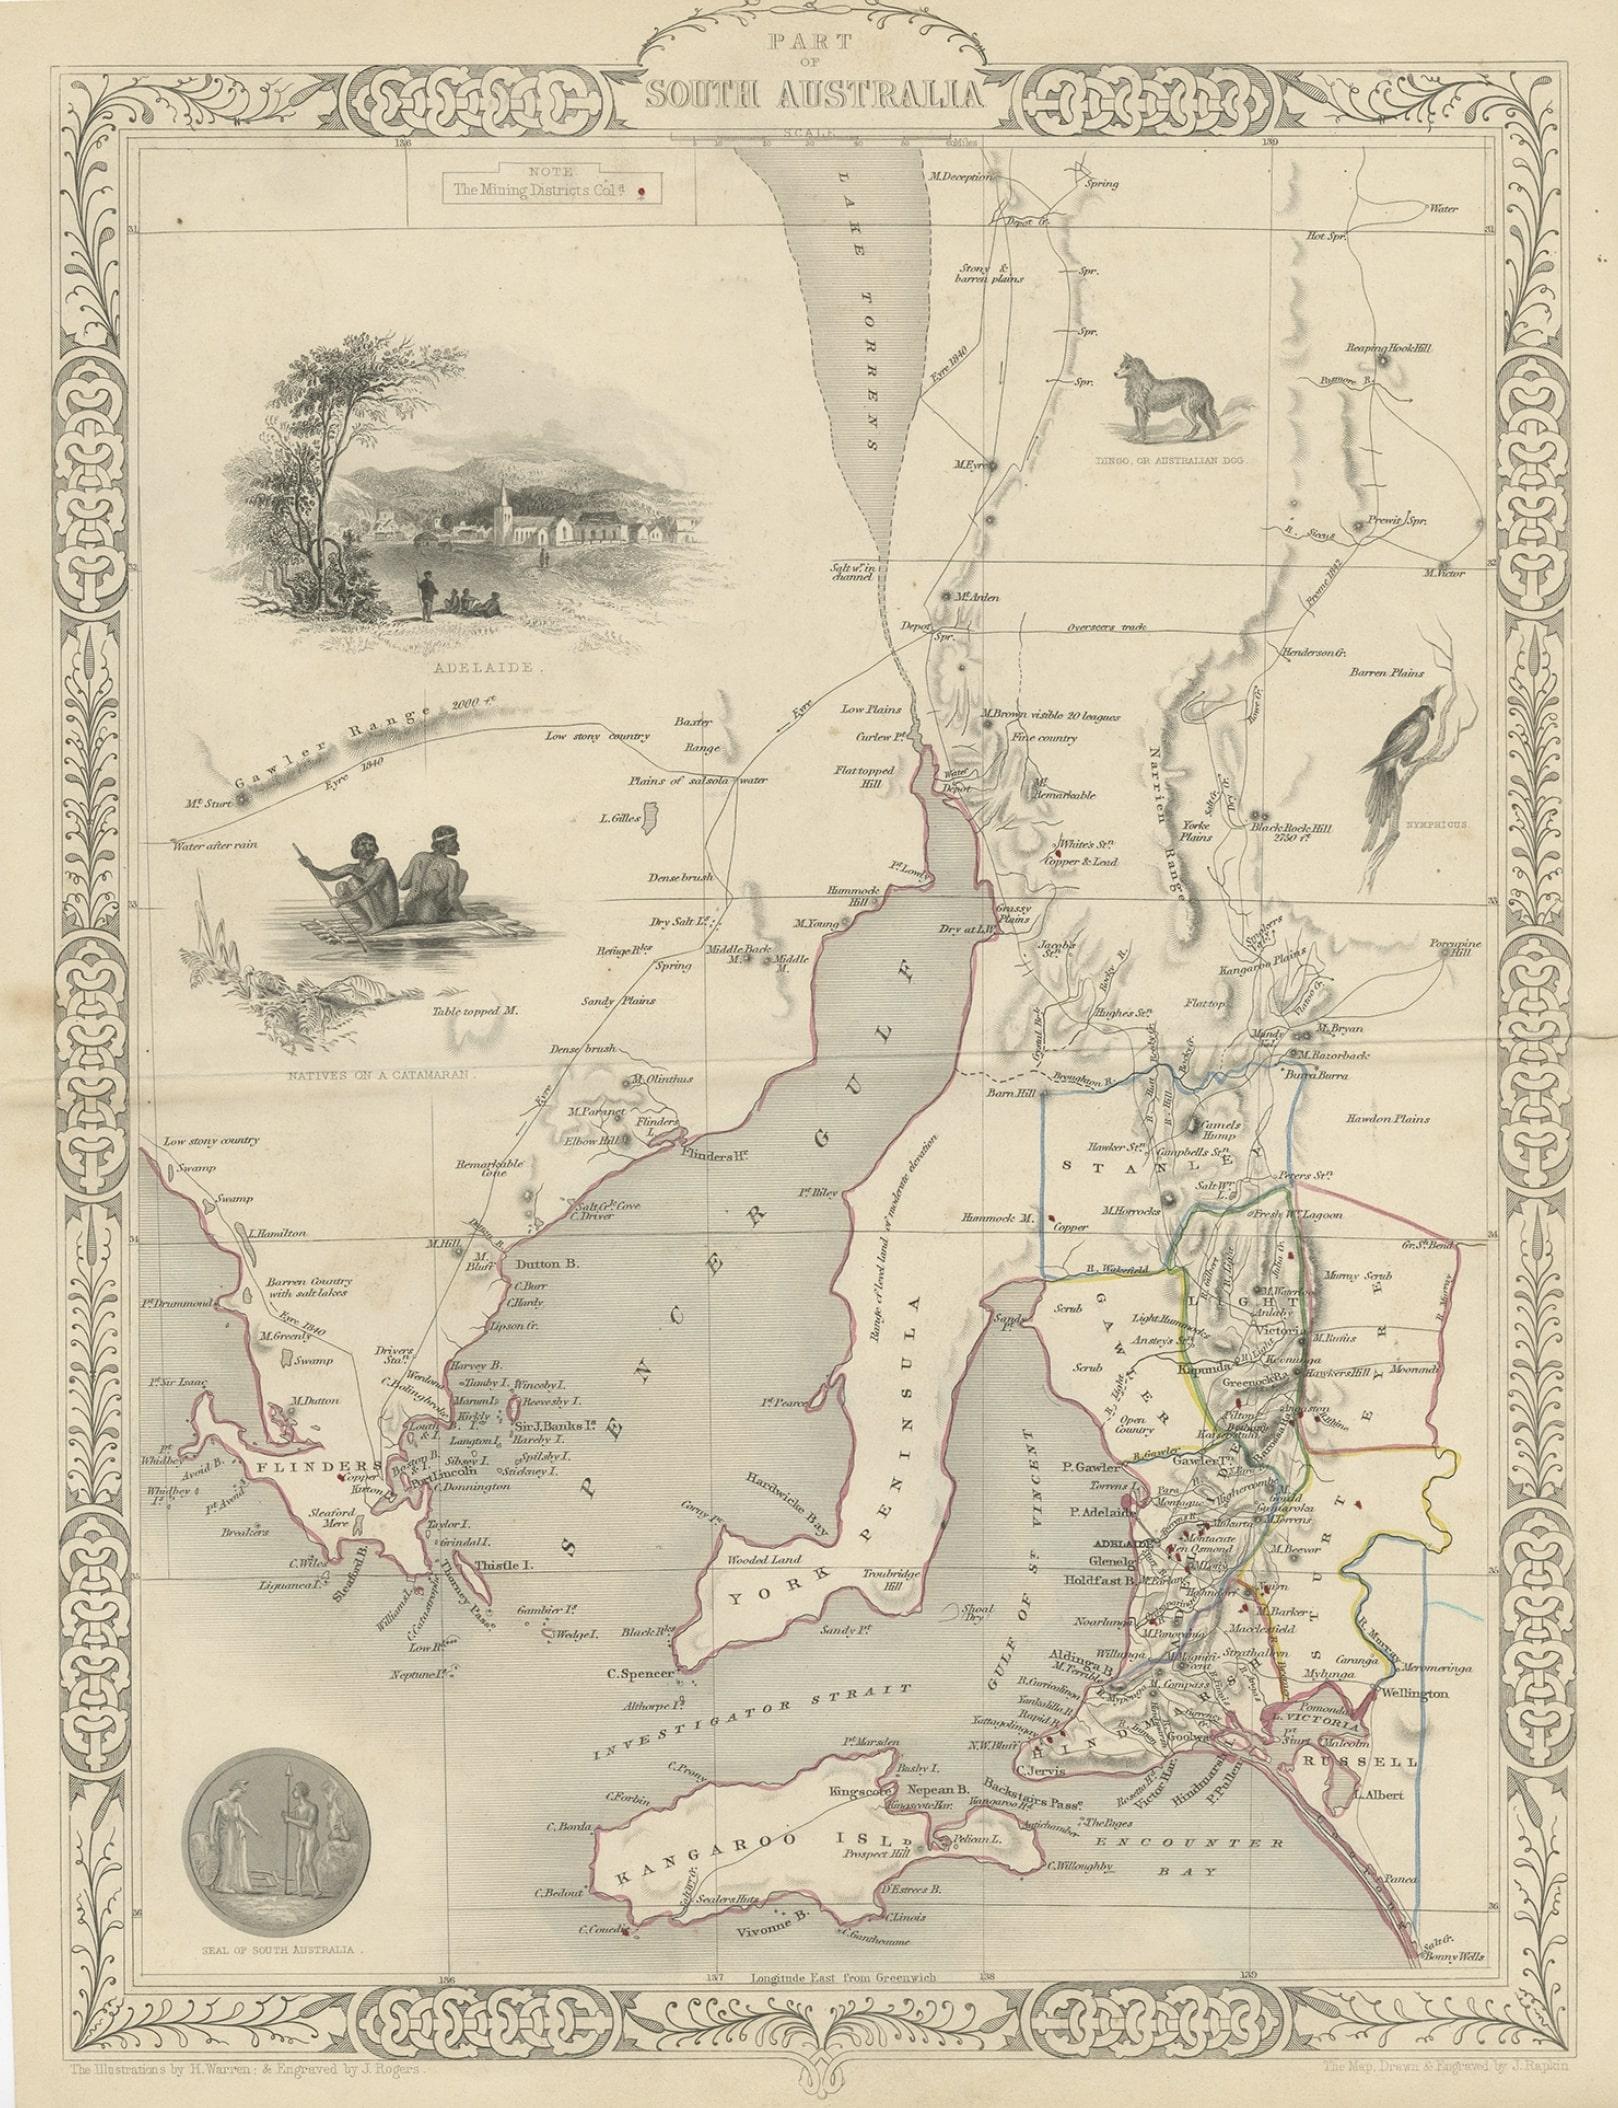 Antique map Australia titled 'Part of South Australia'. 

Decorative map of part of South Australia, surrounded by illustrations of Adelaide, natives on a catamaran, an Australian dog and a nymphicus bird illustrated. Originates from 'The